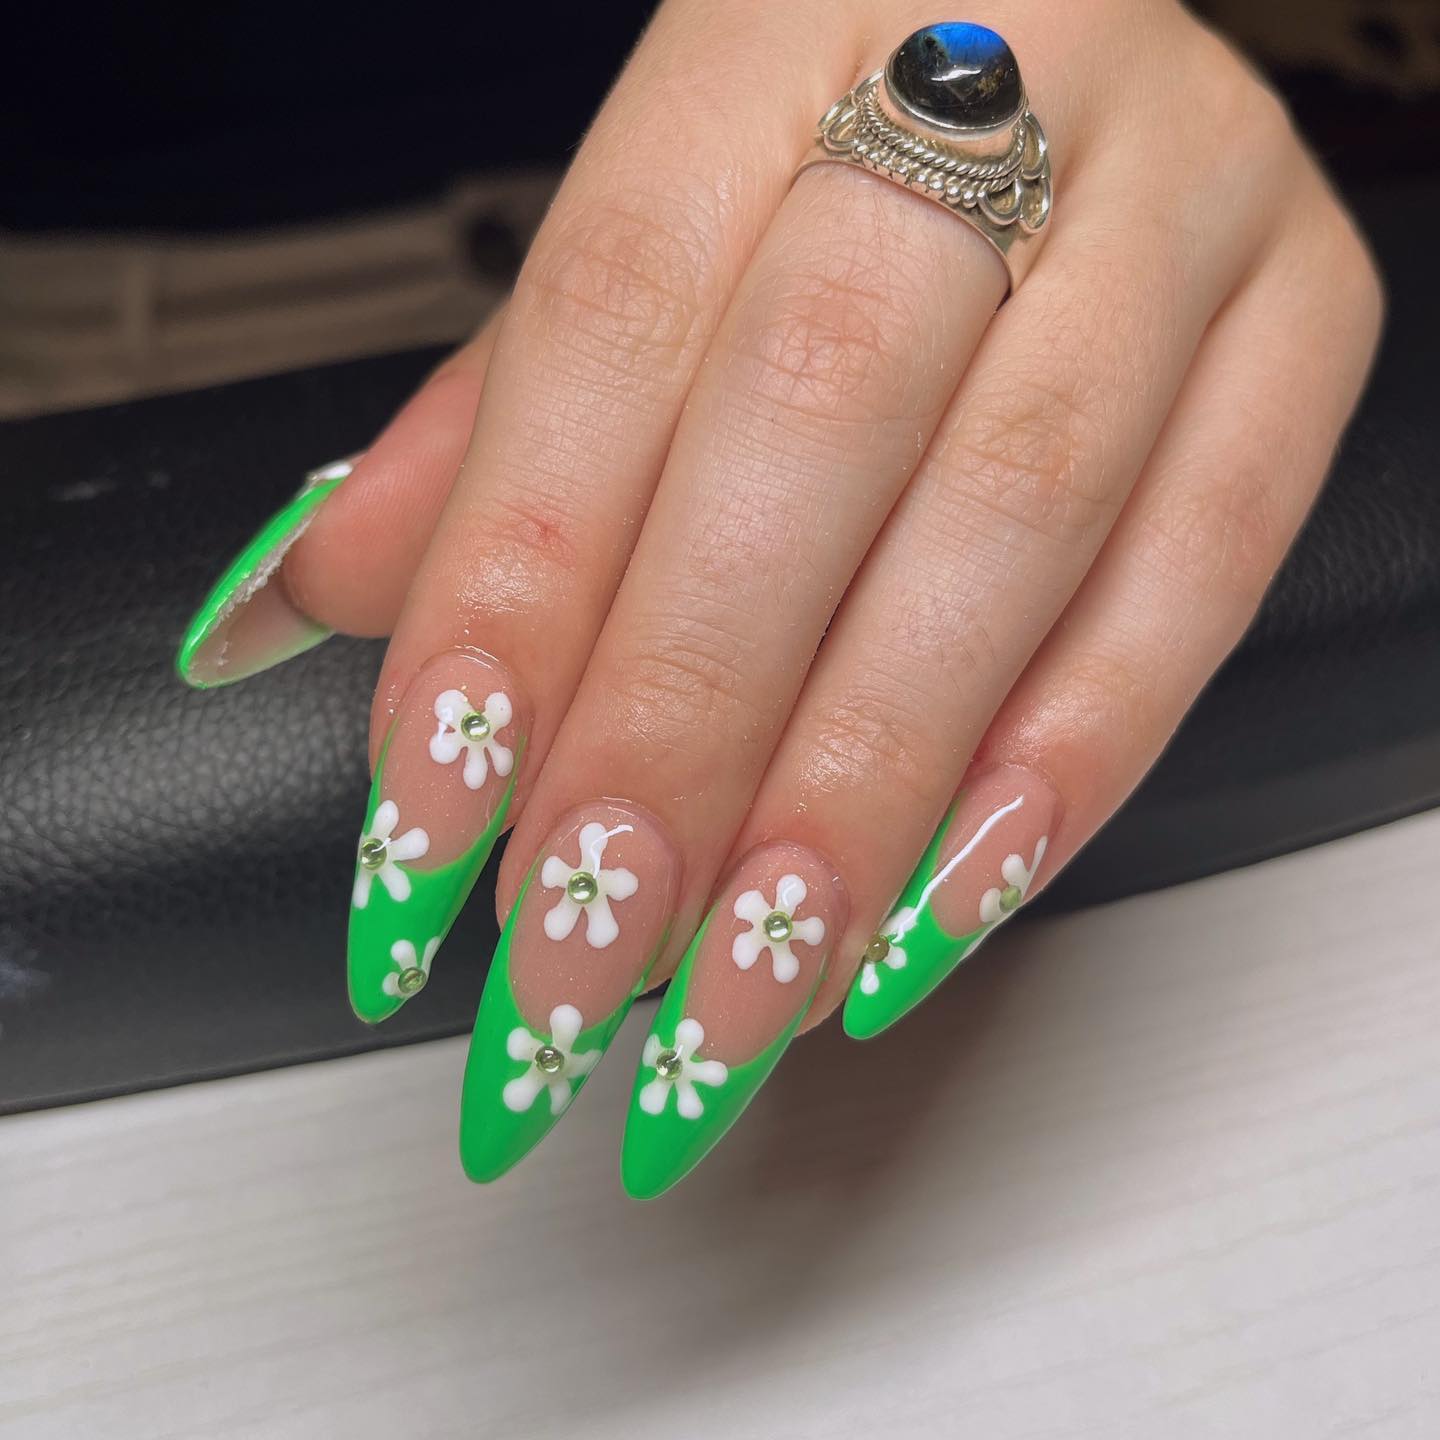 Long stiletto nails look awesome but if you wear a green french manicure with some white flowers, you are sure to bring a summer vibe. 